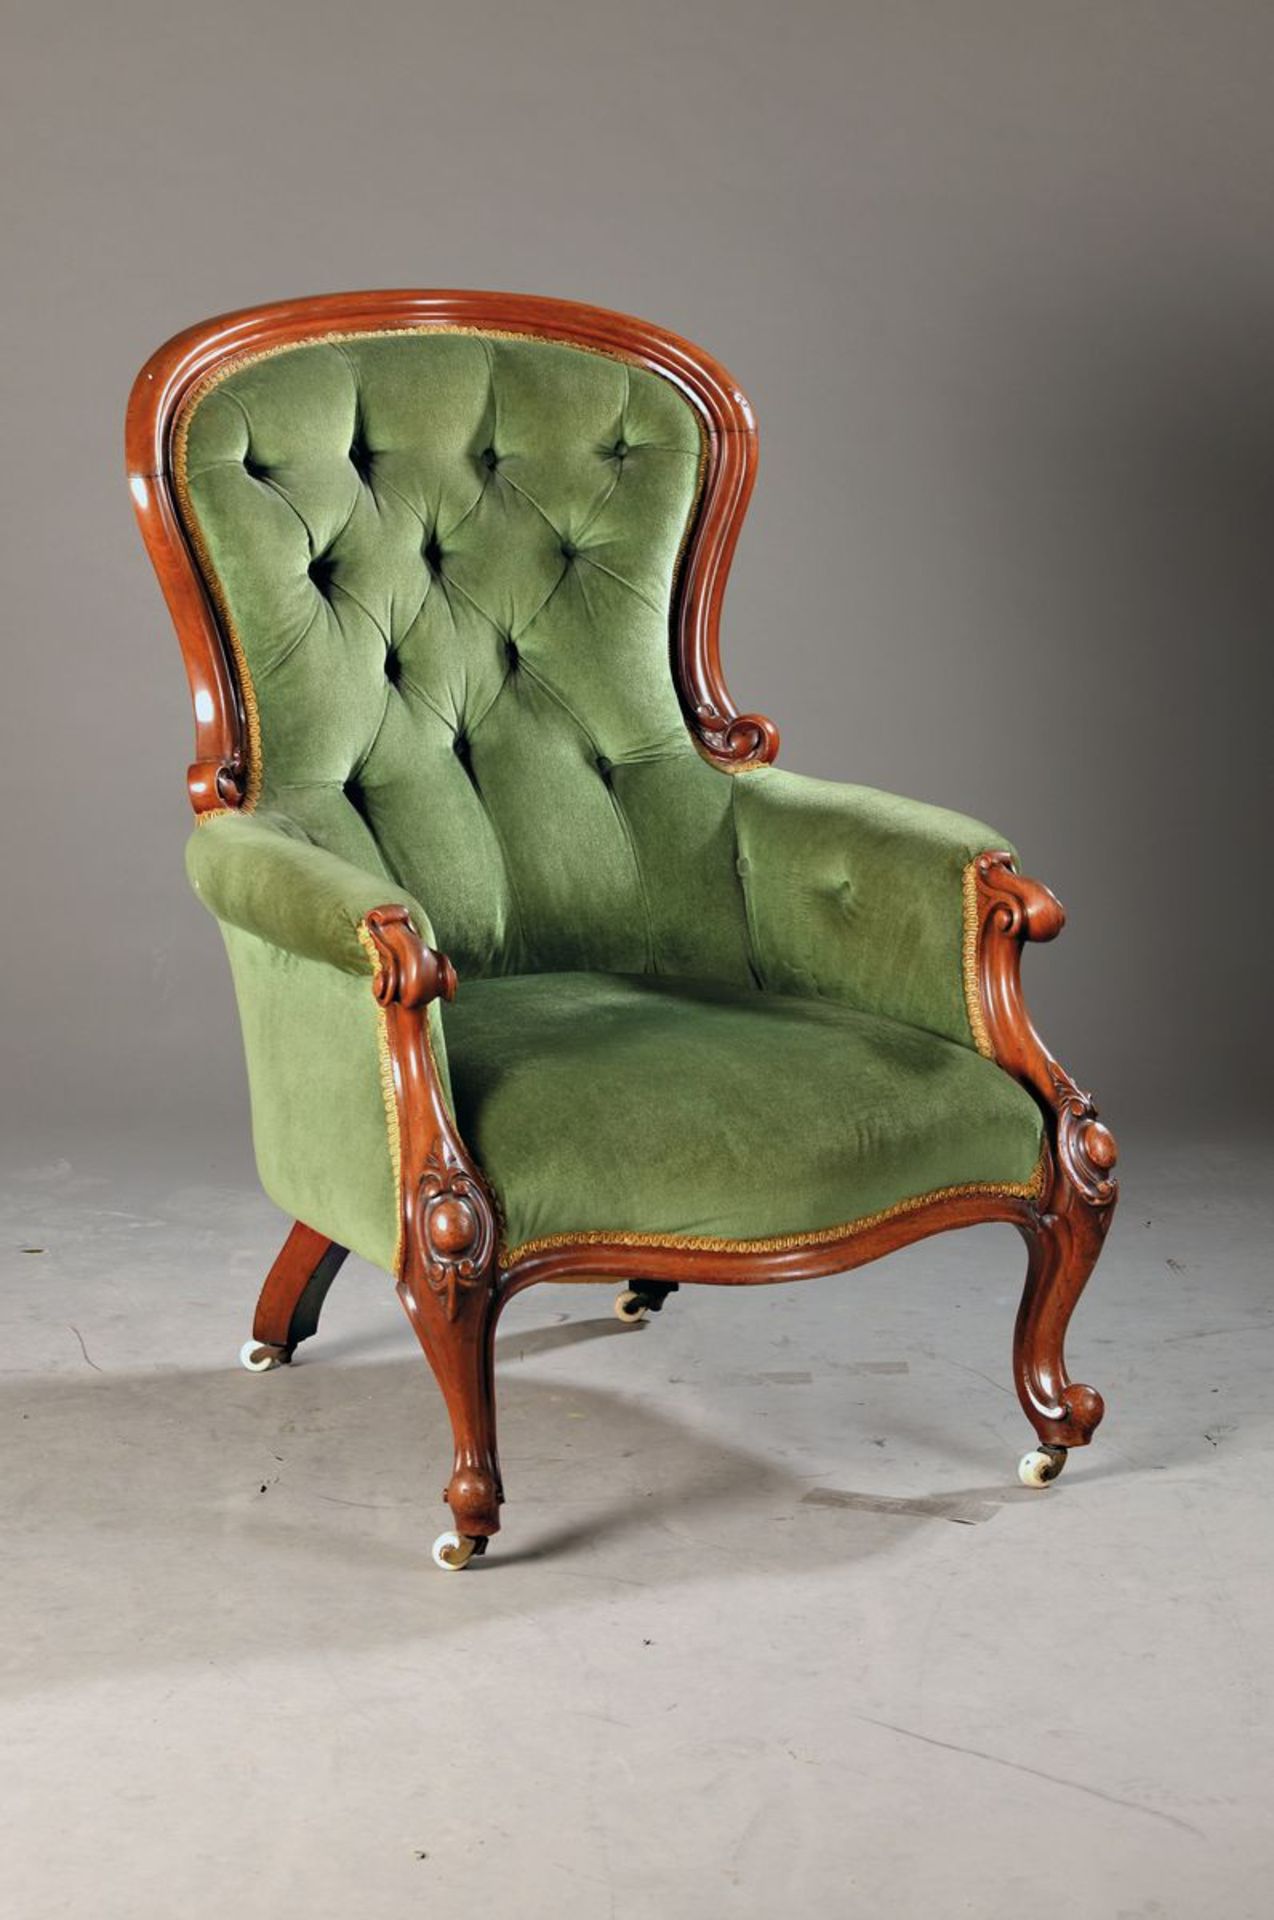 Armchair, 1830/40, Louis-Seize, mahogany respectively Walnut, two-sided cambered, new covering,